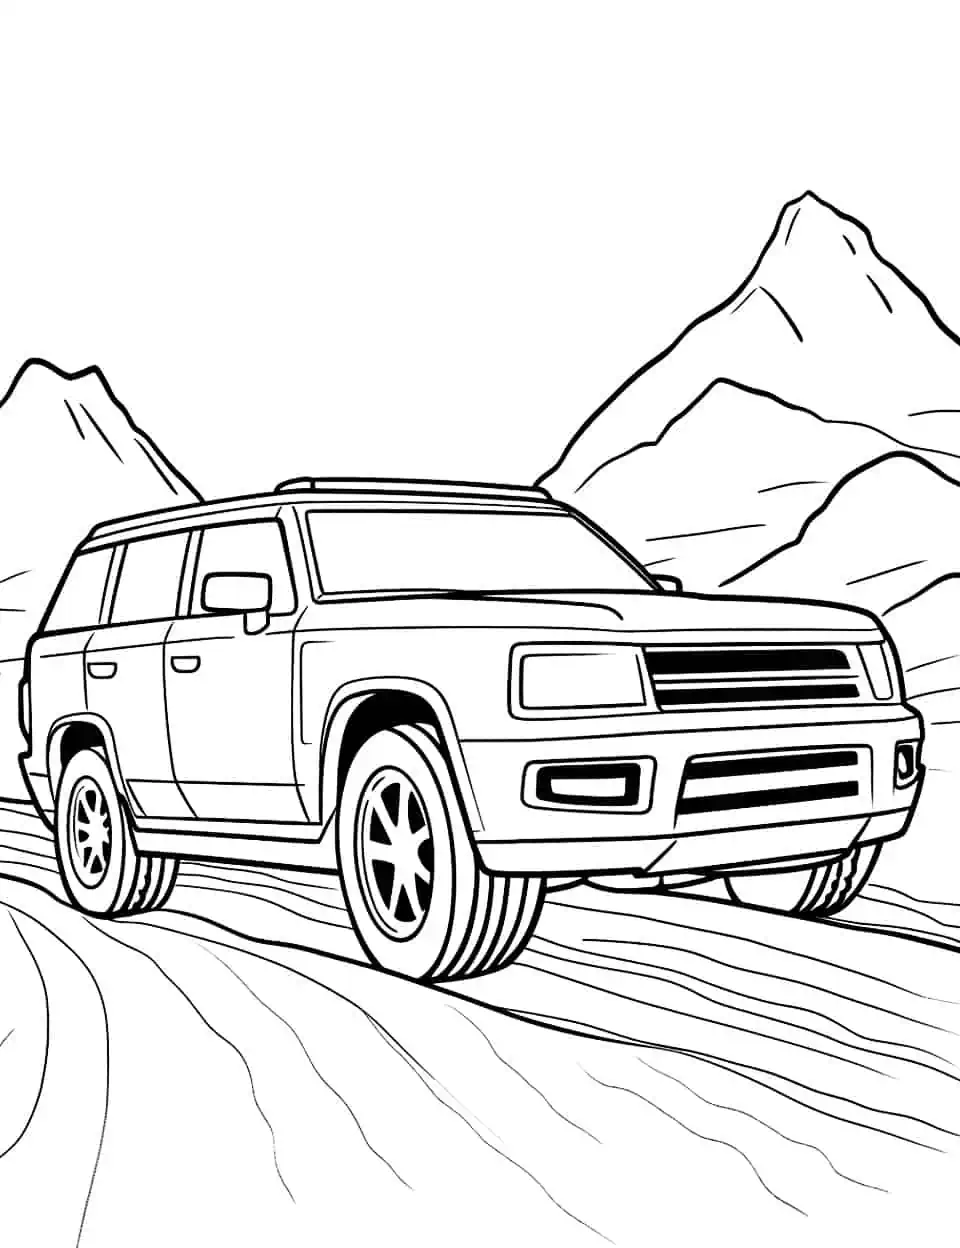 Superb SUV Car Coloring Page - An image of a big, sturdy SUV on a rough terrain, ready to be colored.